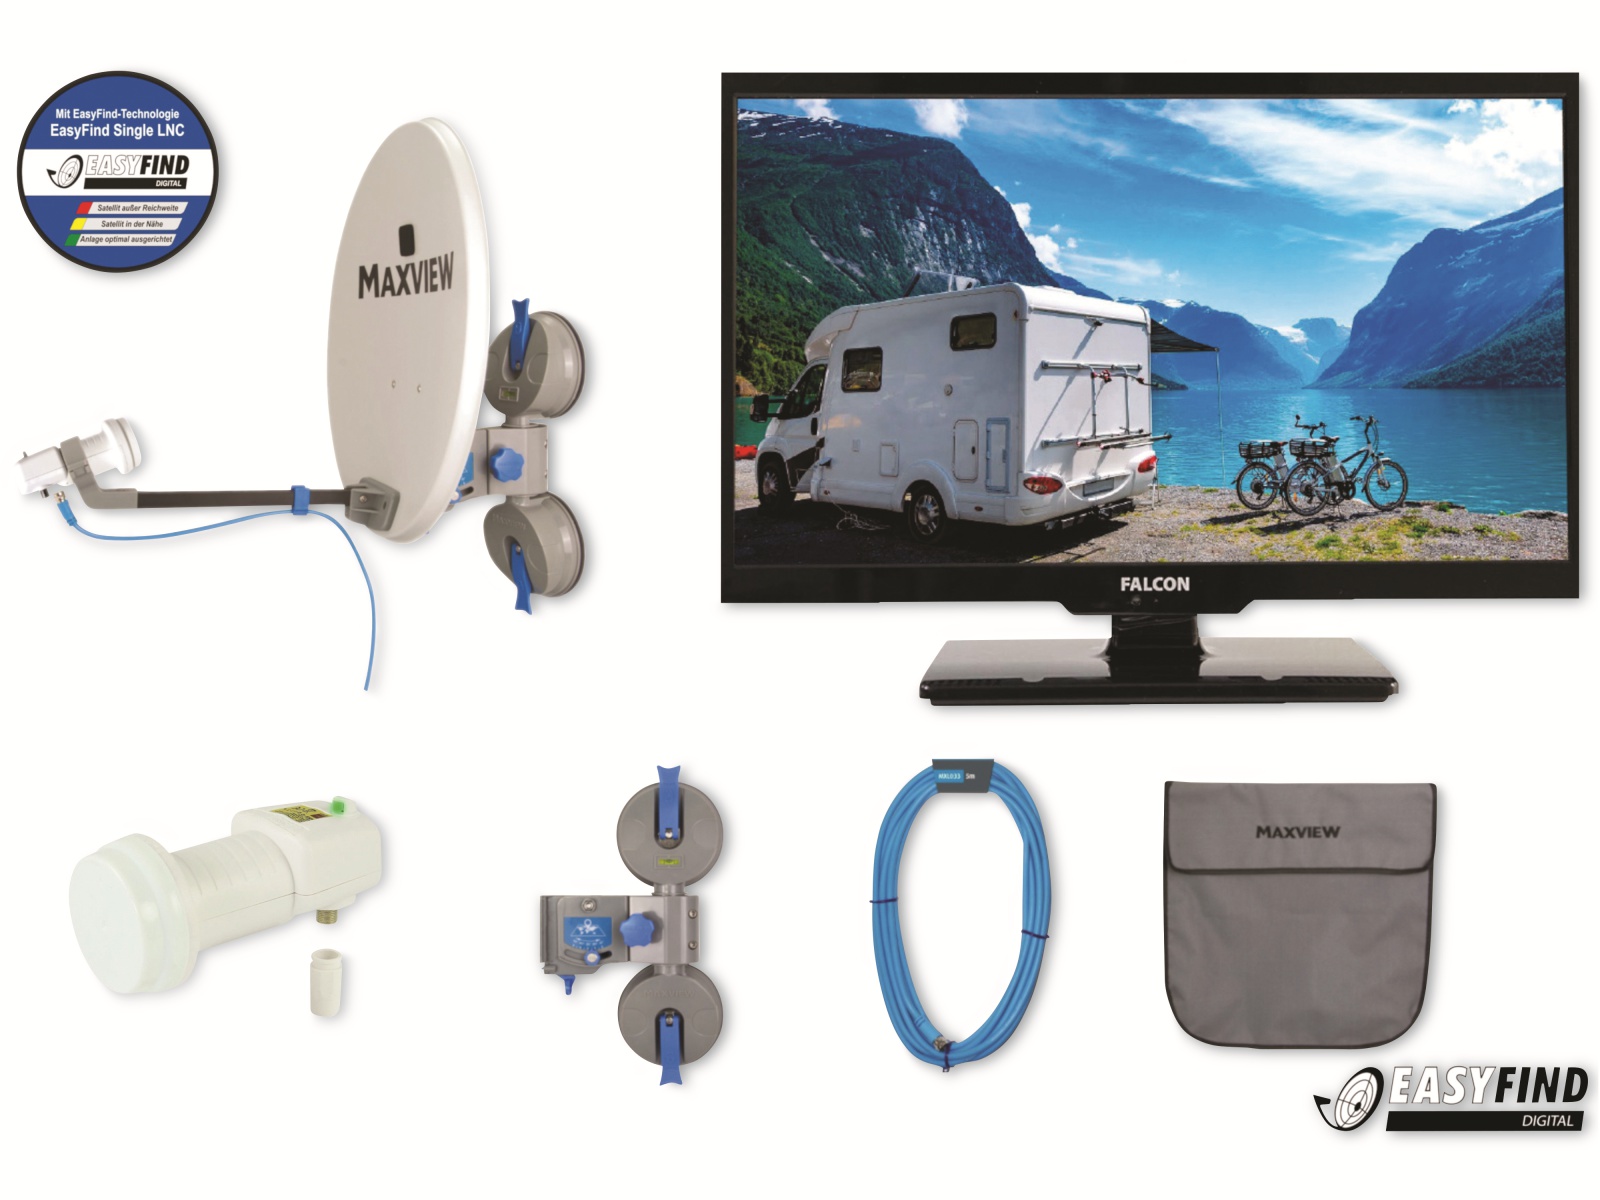 FALCON Easyfind TV Camping Set Maxview Pro, inkl. LED-TV 48 cm (19")